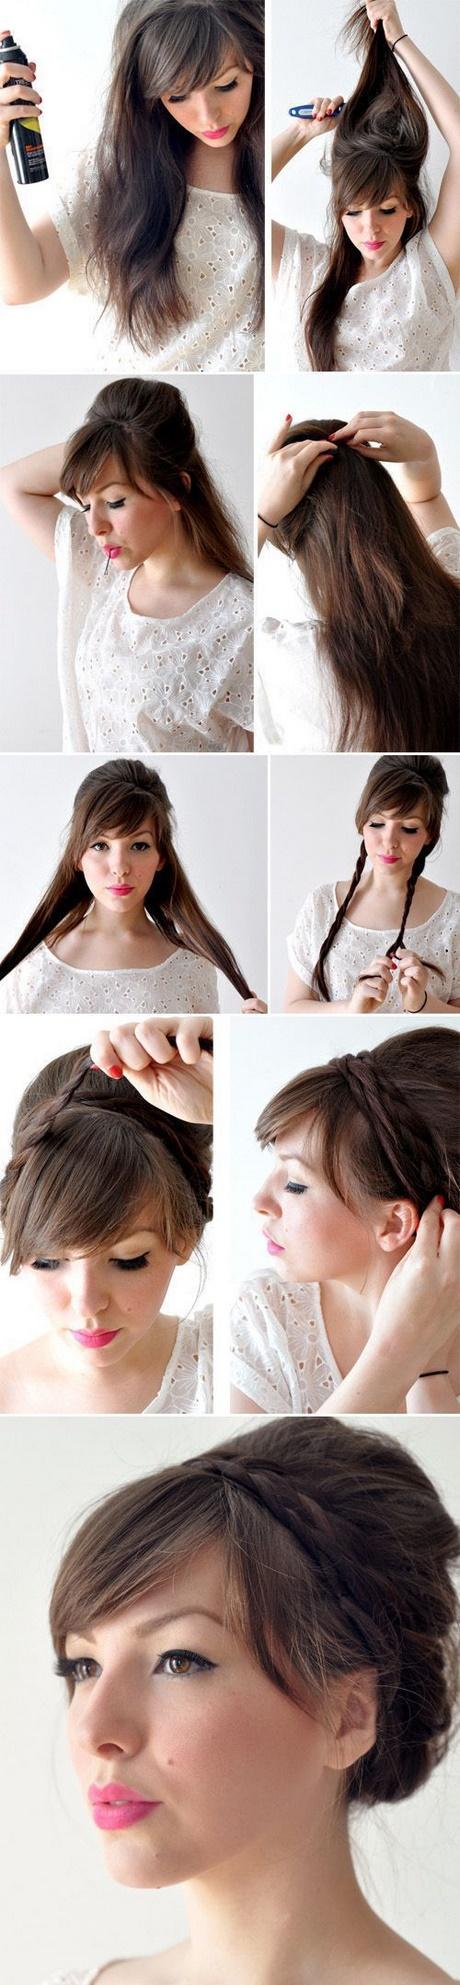 cute-hairstyles-to-do-at-home-30_5 Aranyos frizurák otthon